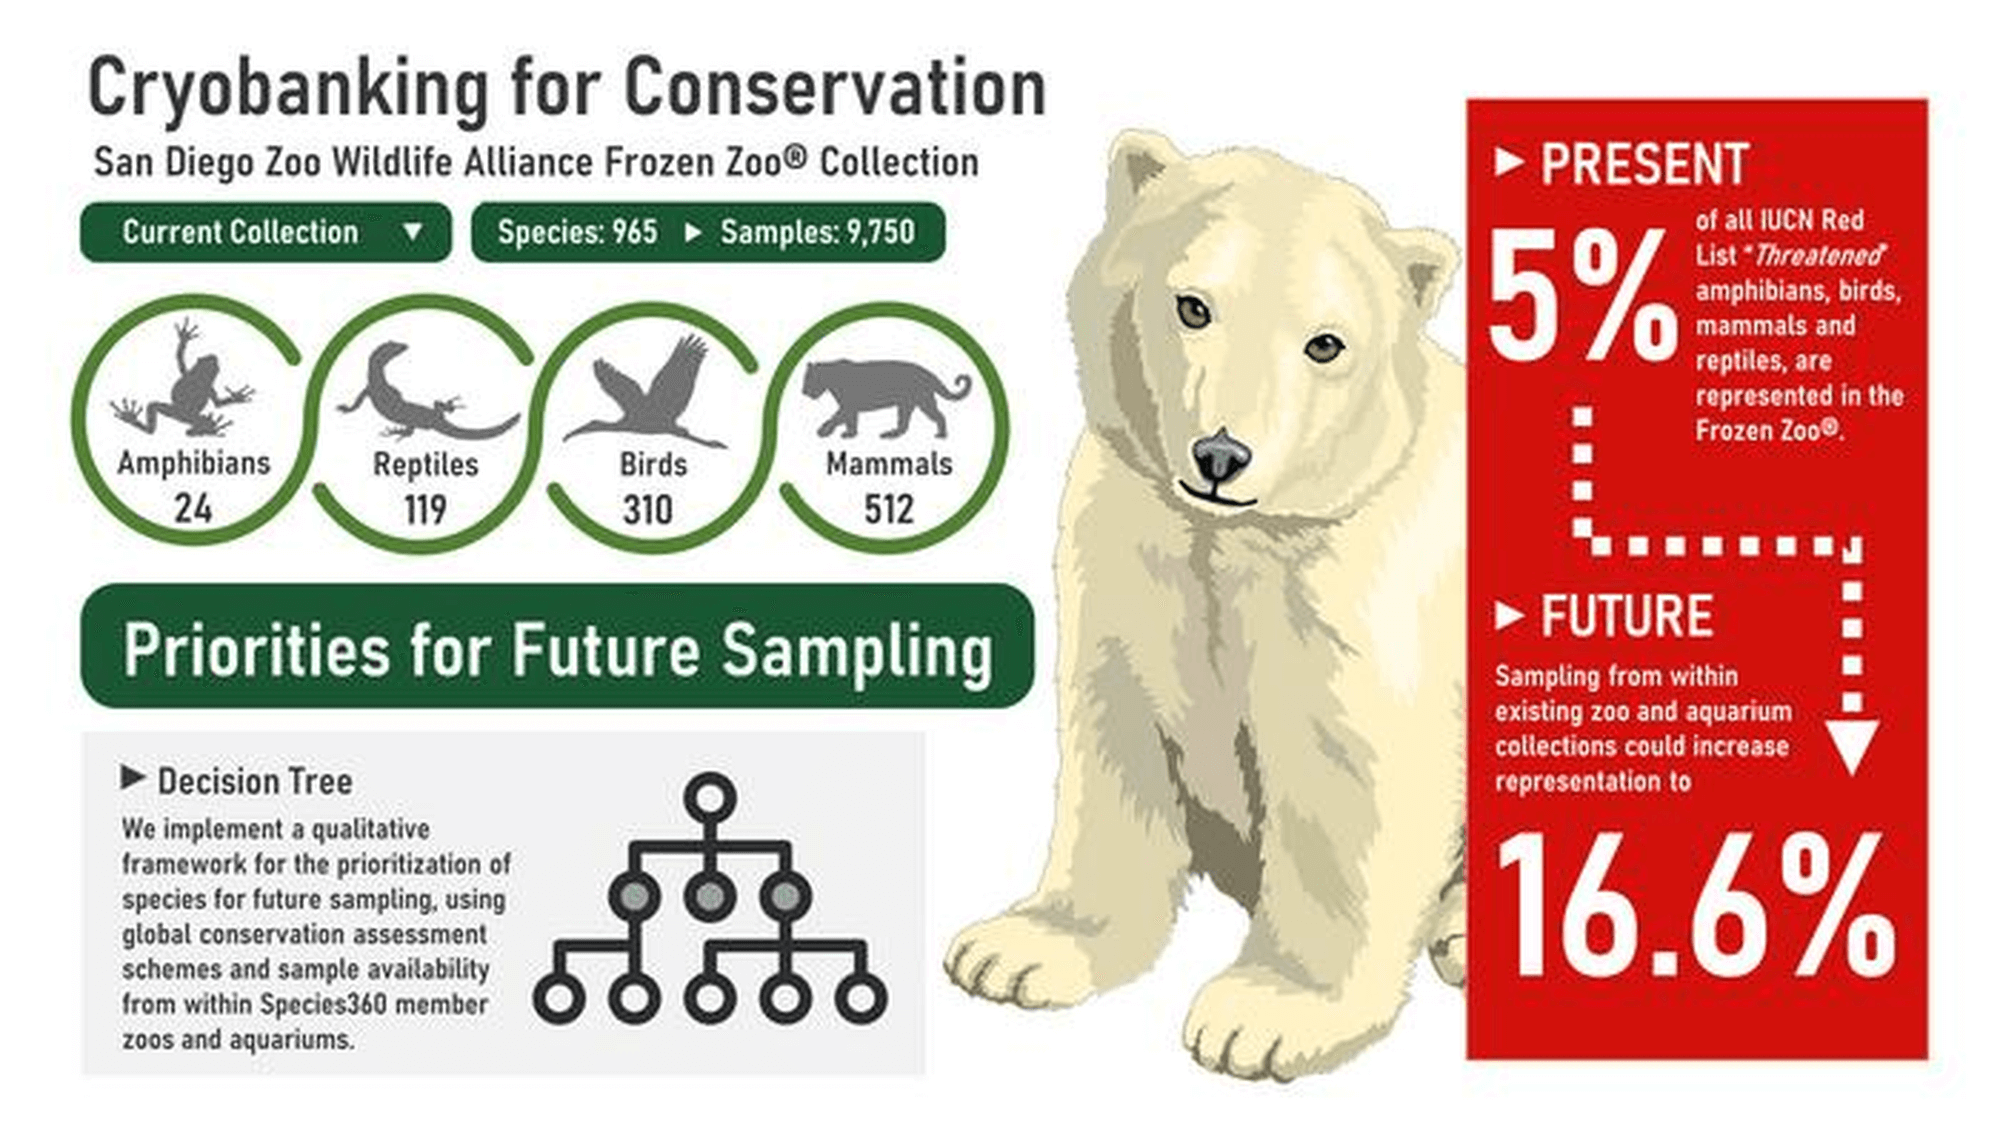 Graphic showing how cryobanking can help conservation